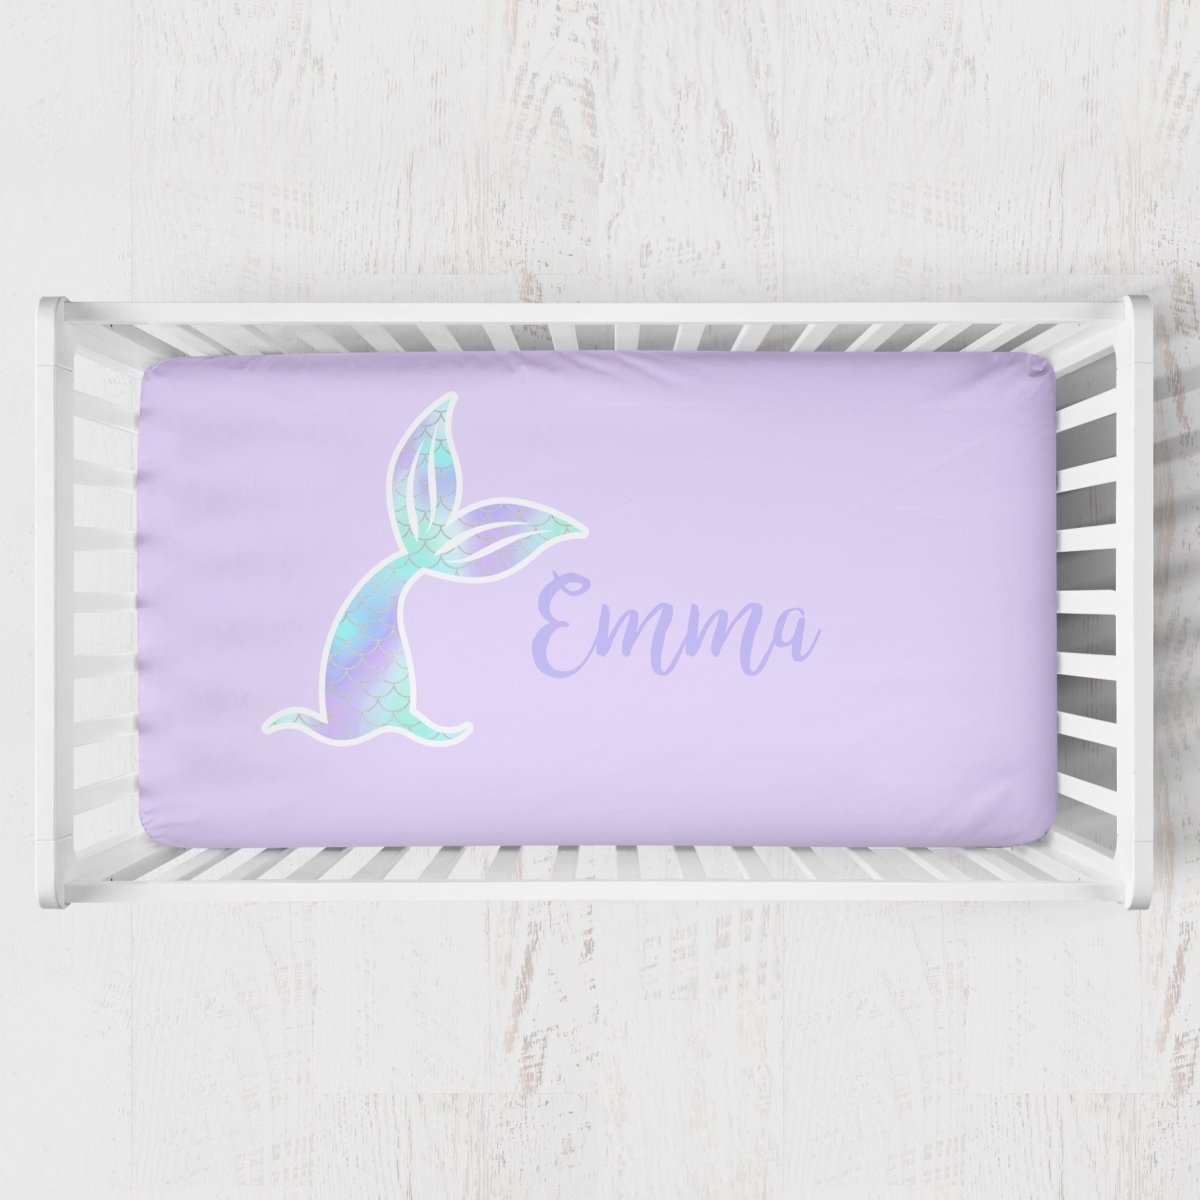 Mermaid Love Personalized Crib Sheet - gender_girl, Personalized_Yes, text